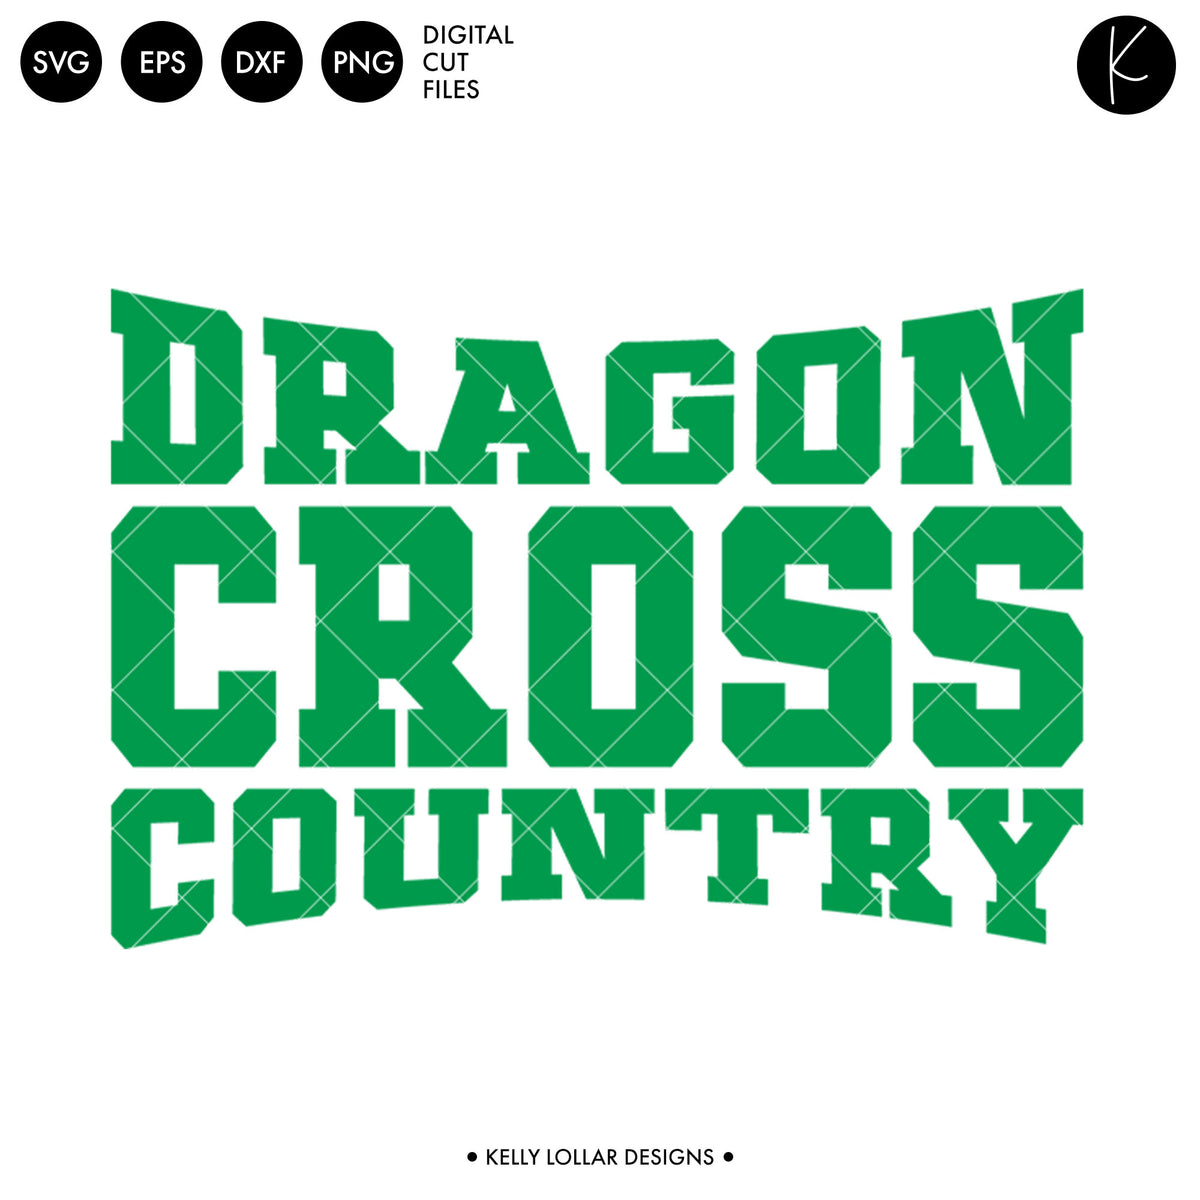 Dragons Cross Country Bundle | SVG DXF EPS PNG Cut Files